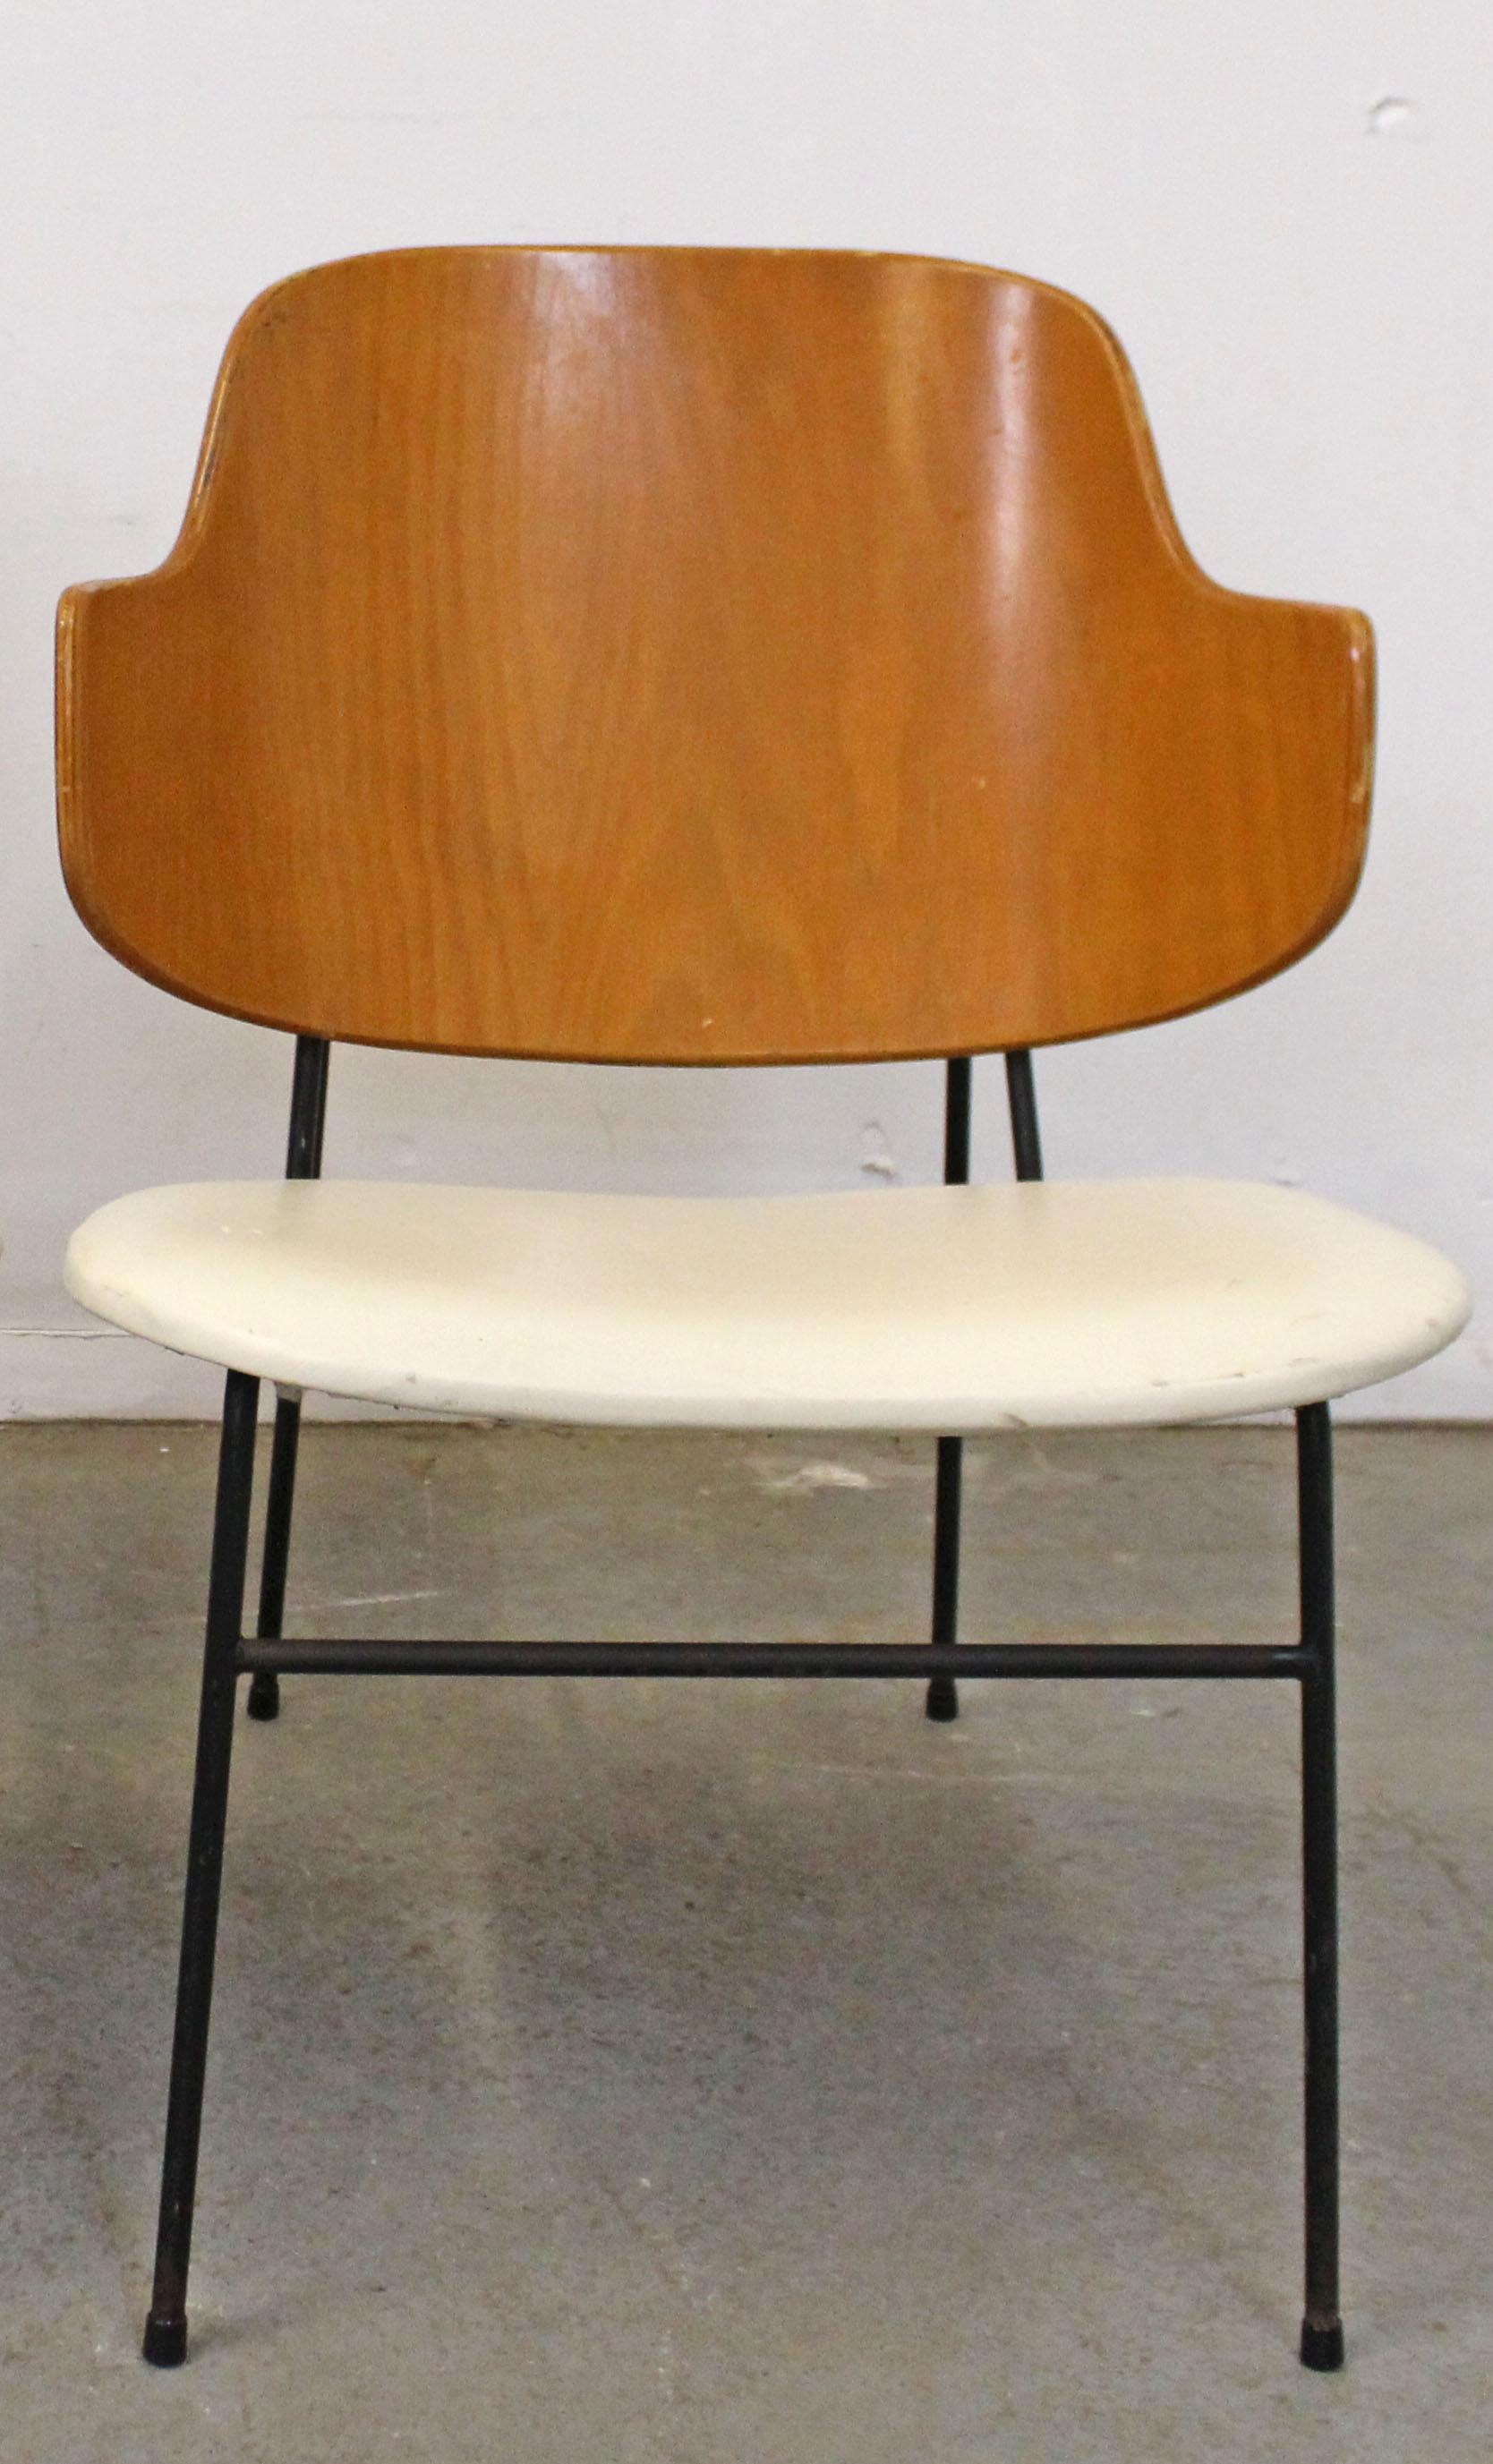 What a find. Offered is an original 'Penguin' chair designed by IB Kofod Larsen for Selig. This piece was designed in 1953 and had a limited production through the 1960s. This chair has a wood back and vinyl seat. In good, structurally sound